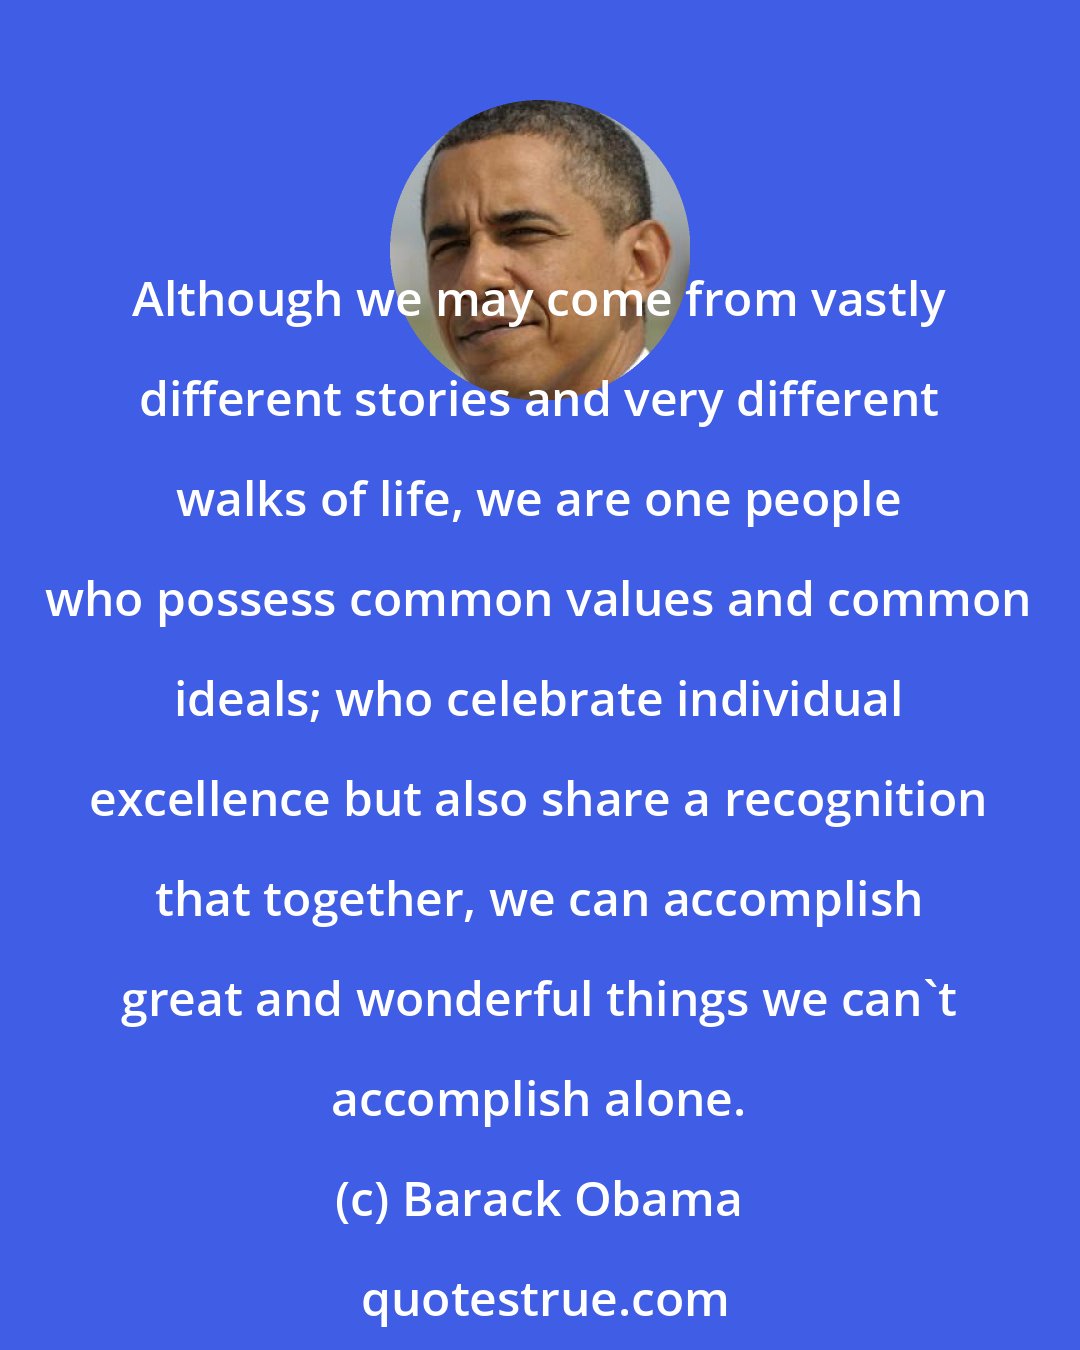 Barack Obama: Although we may come from vastly different stories and very different walks of life, we are one people who possess common values and common ideals; who celebrate individual excellence but also share a recognition that together, we can accomplish great and wonderful things we can't accomplish alone.